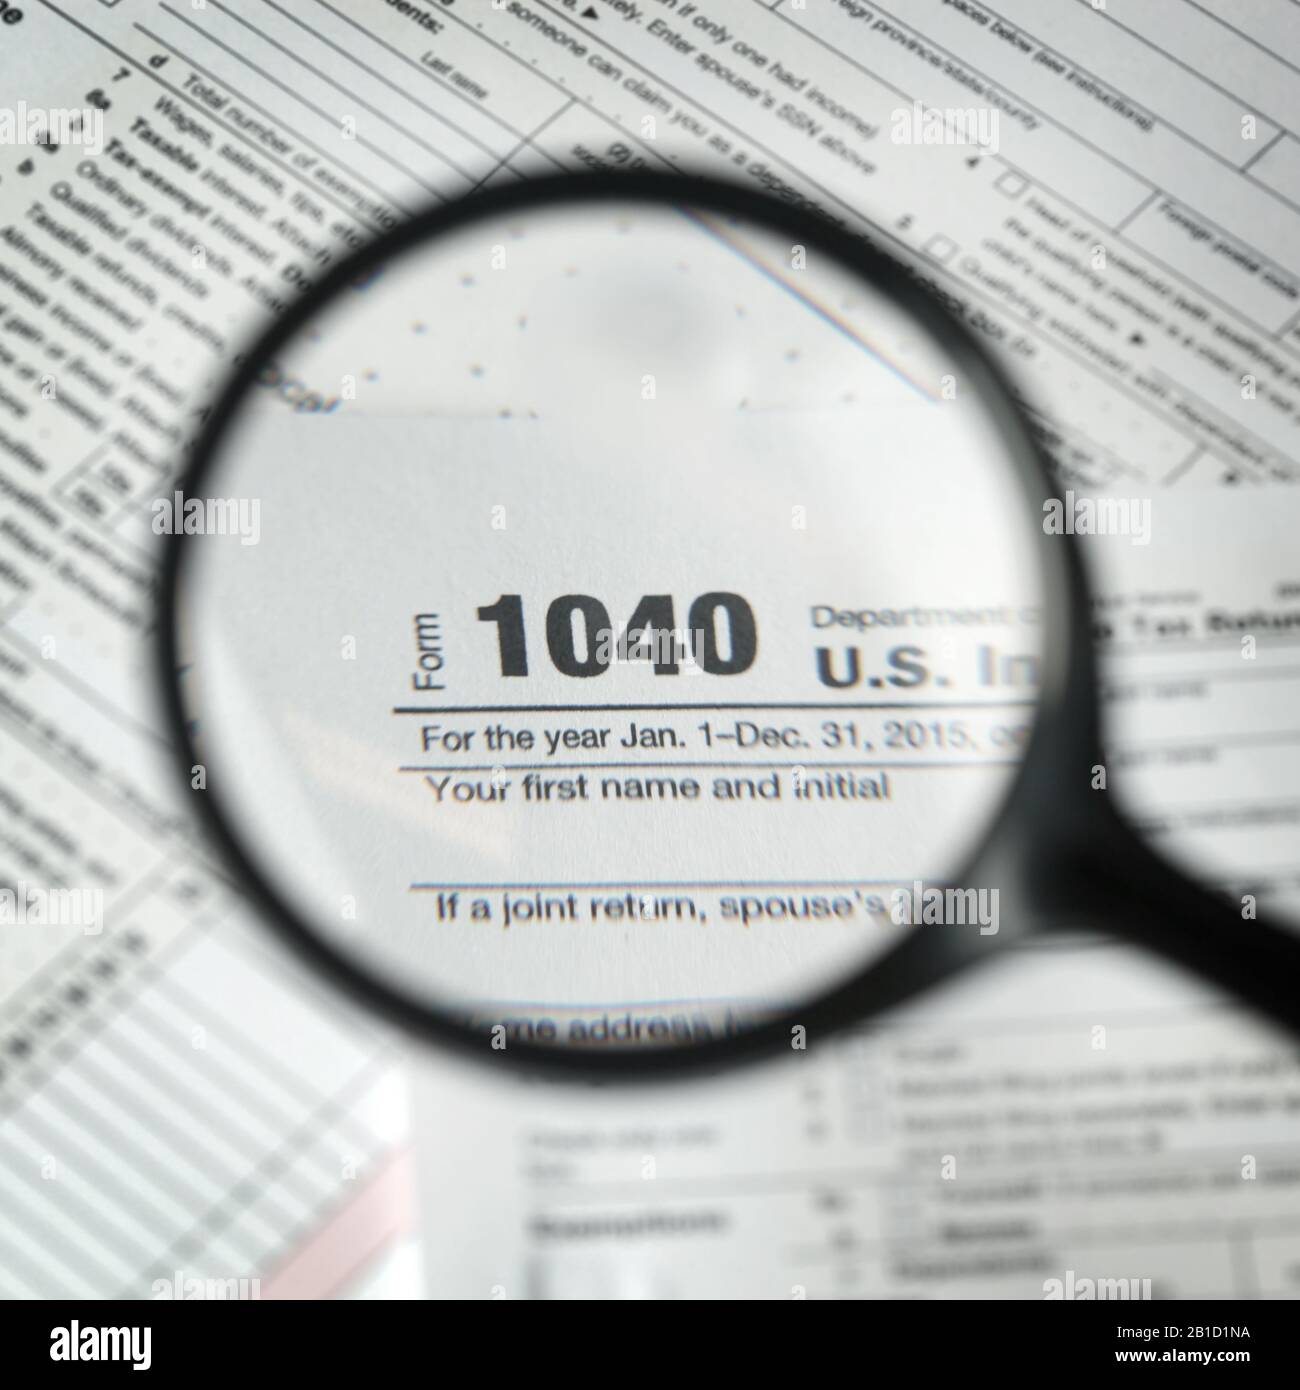 1040 tax form background Stock Photo